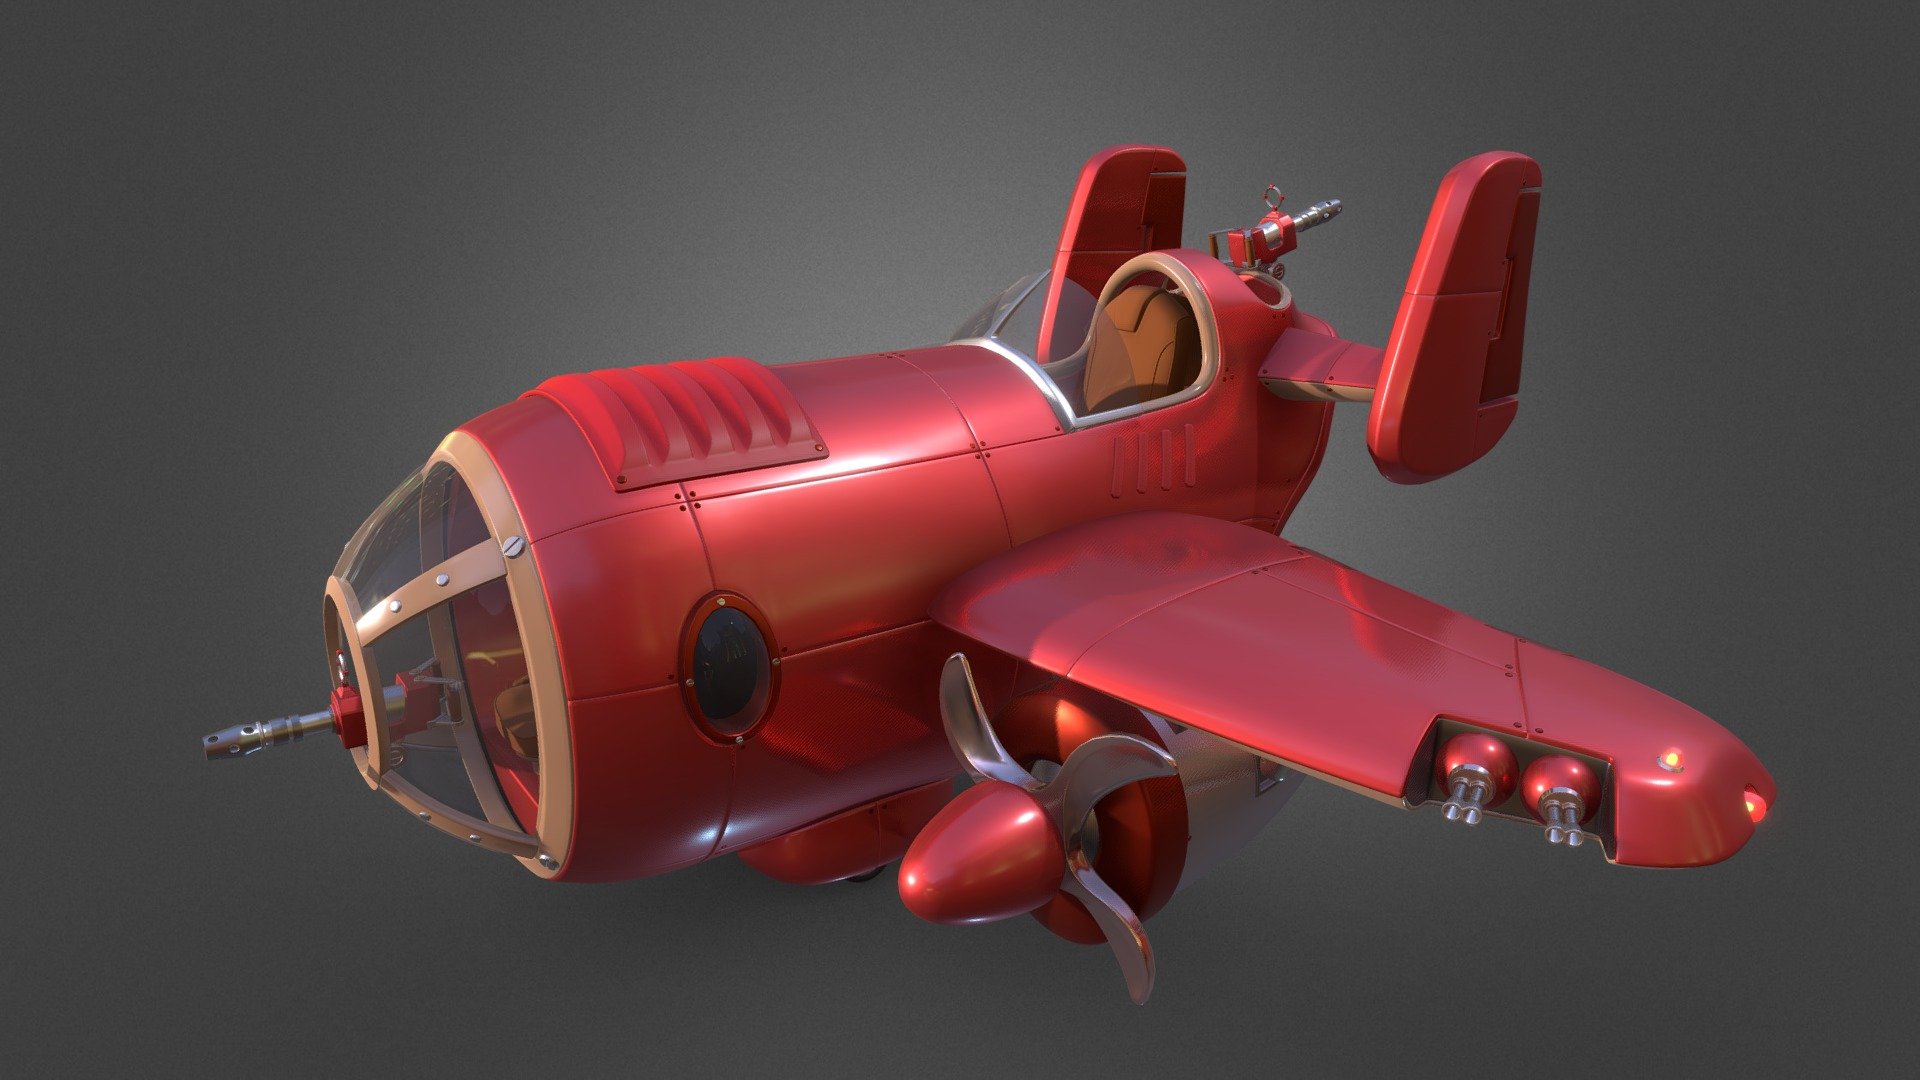 Hi!
This is a model I made as a hard surface practice on Maya. At first, I rendered it using Arnold, but I decided to upload it here and recreate the materials using the ones from Sketchfab.
Hope you like it!

Based on a concept from Ido Yehimovitz: http://artofyido.blogspot.com.es/ - Wyld Rabbits airplane - 3D model by Typhen 3d model